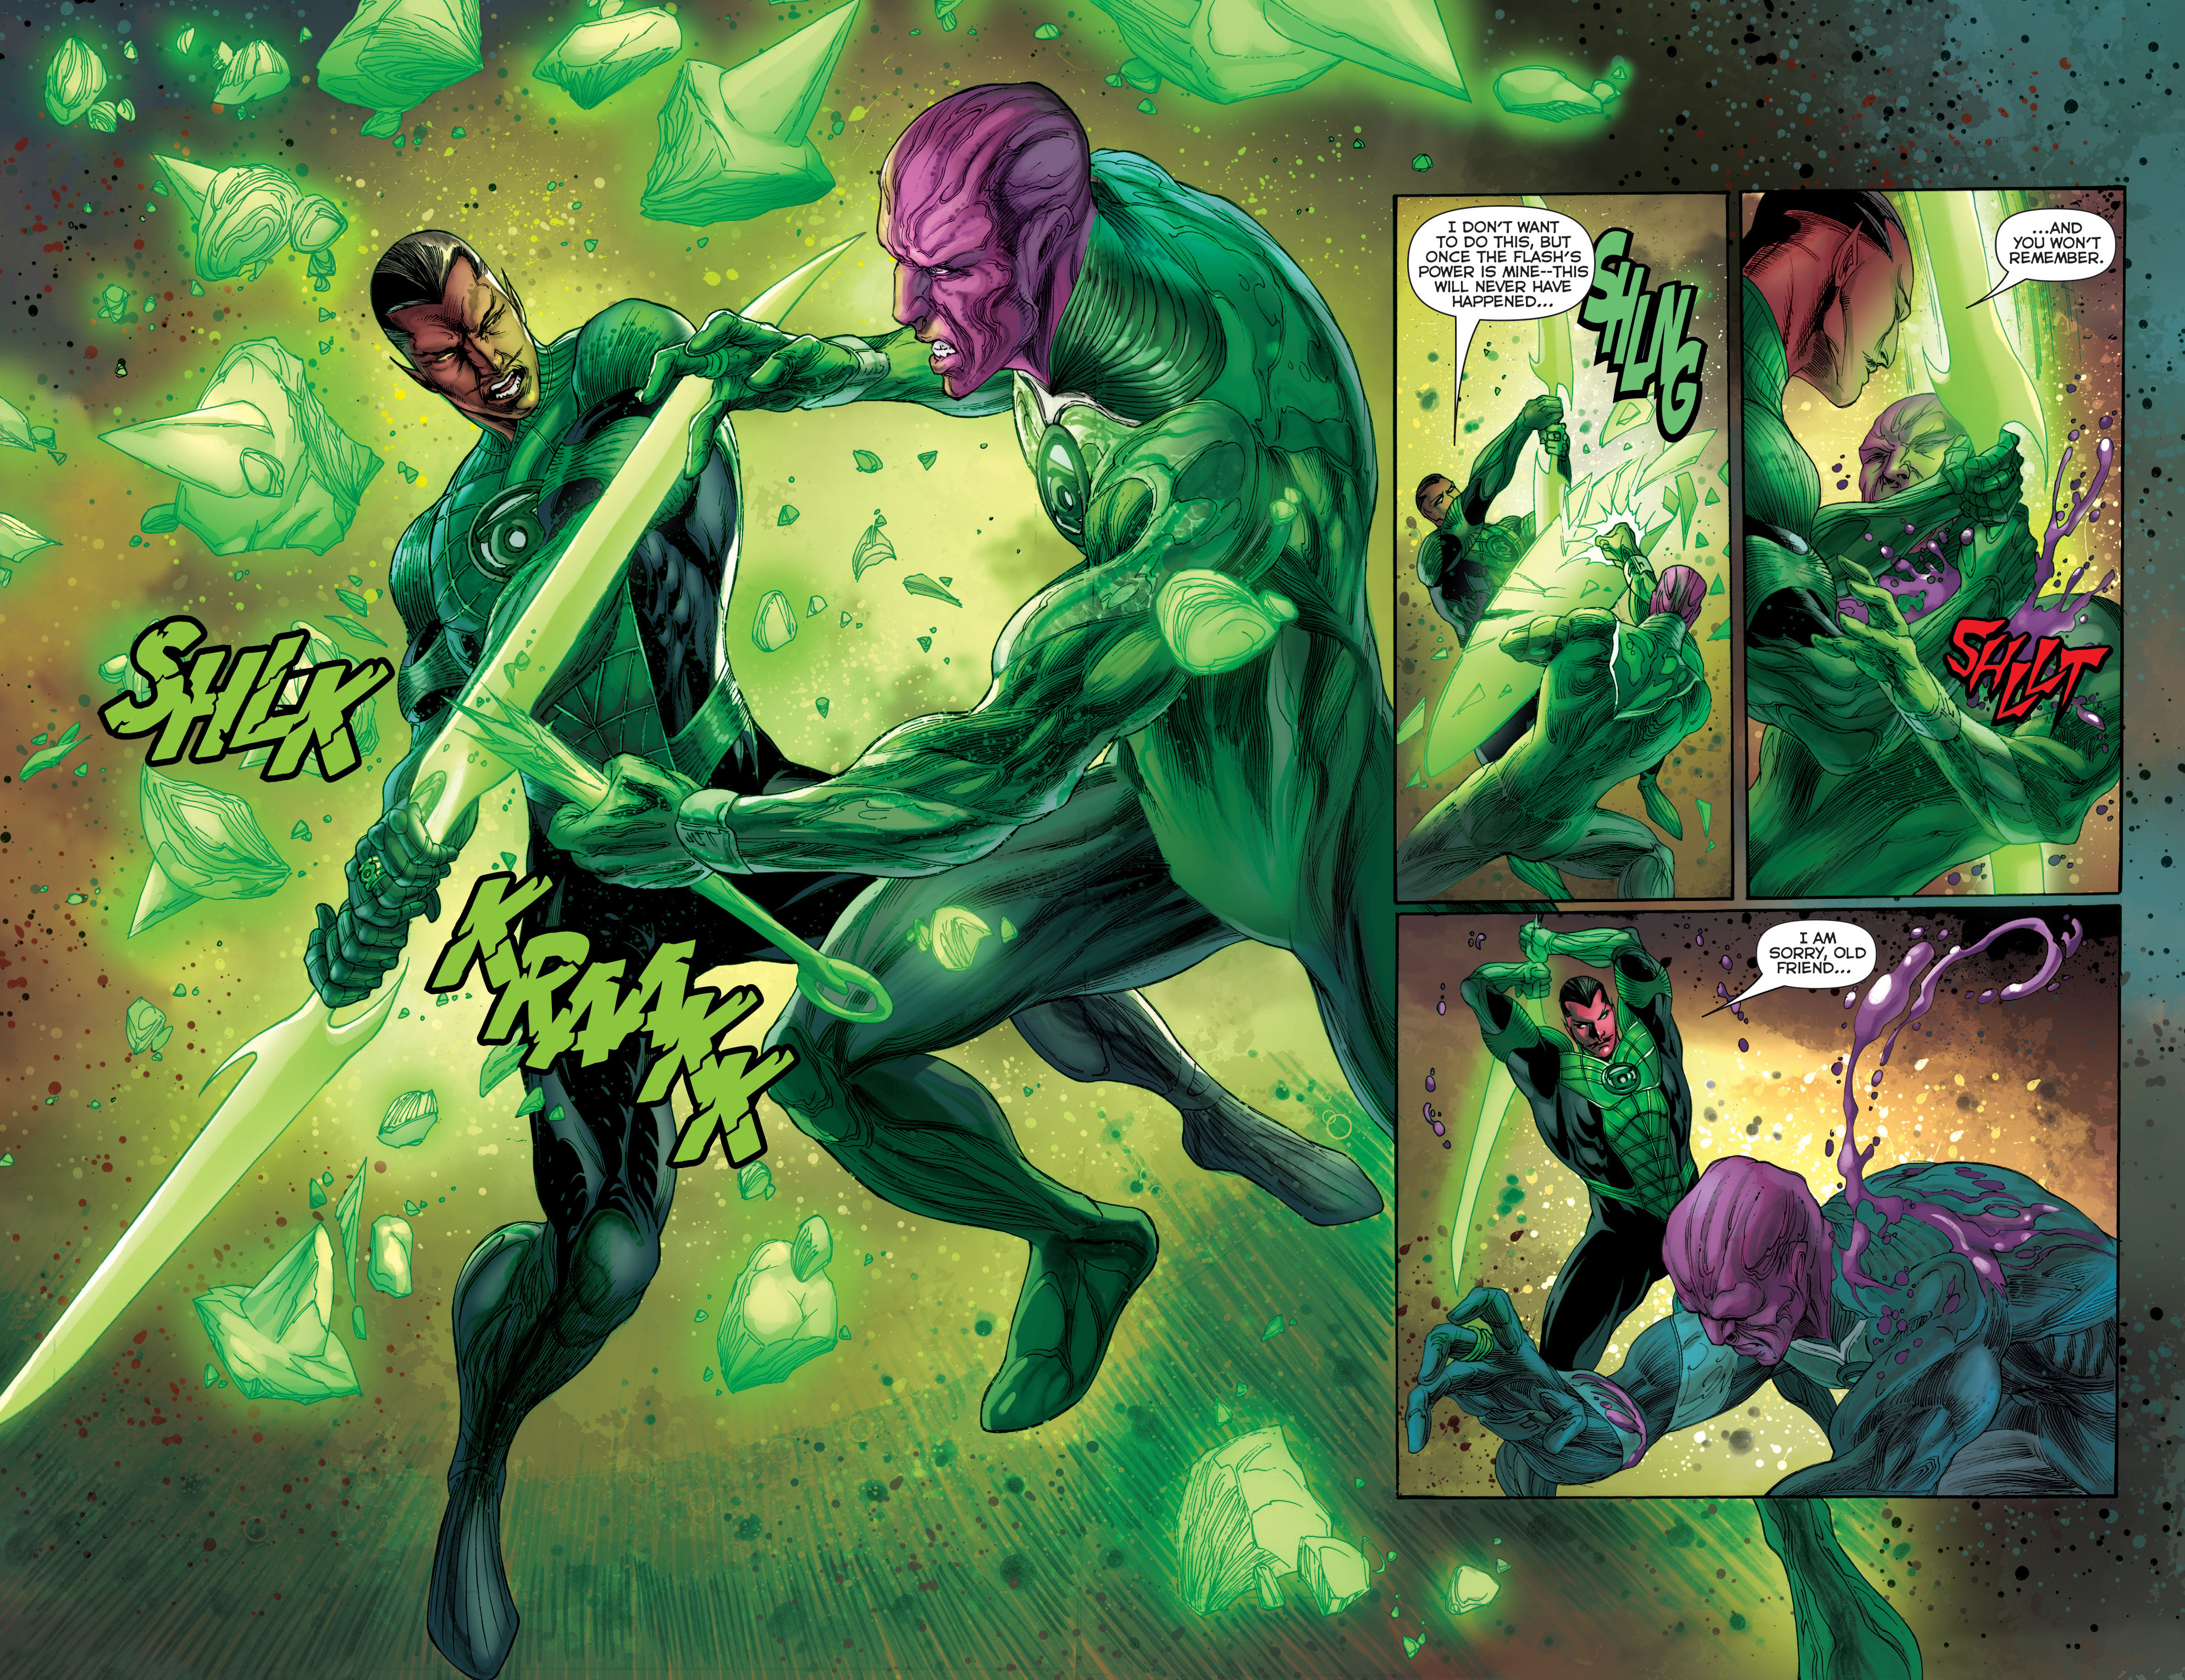 Flashpoint: The World of Flashpoint Featuring Green Lantern Full #1 - English 42